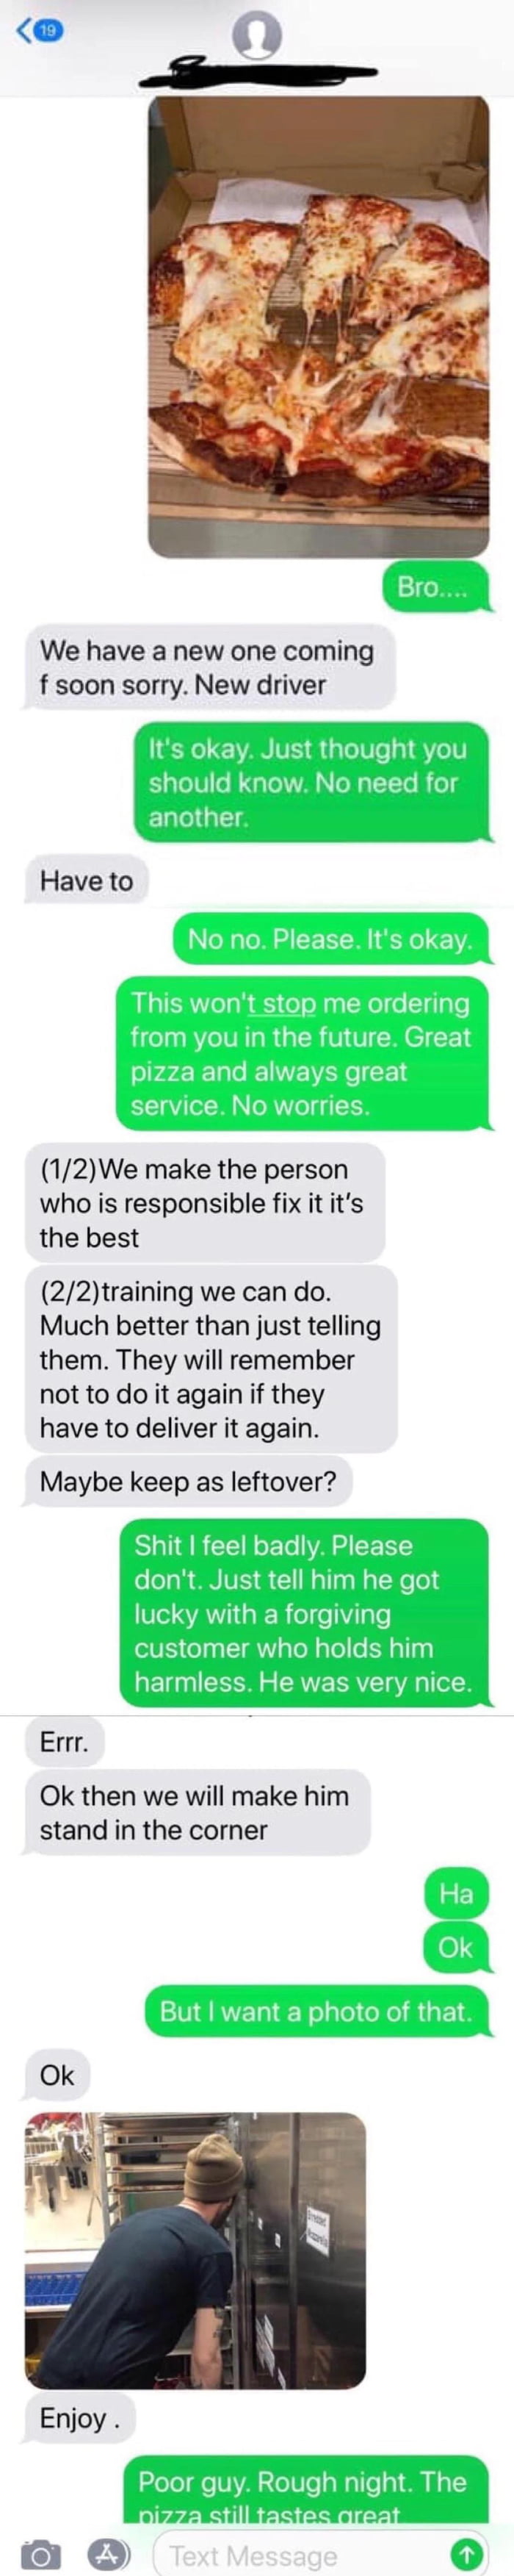 Messed up pizza delivery and a wholesome, overly nice customer